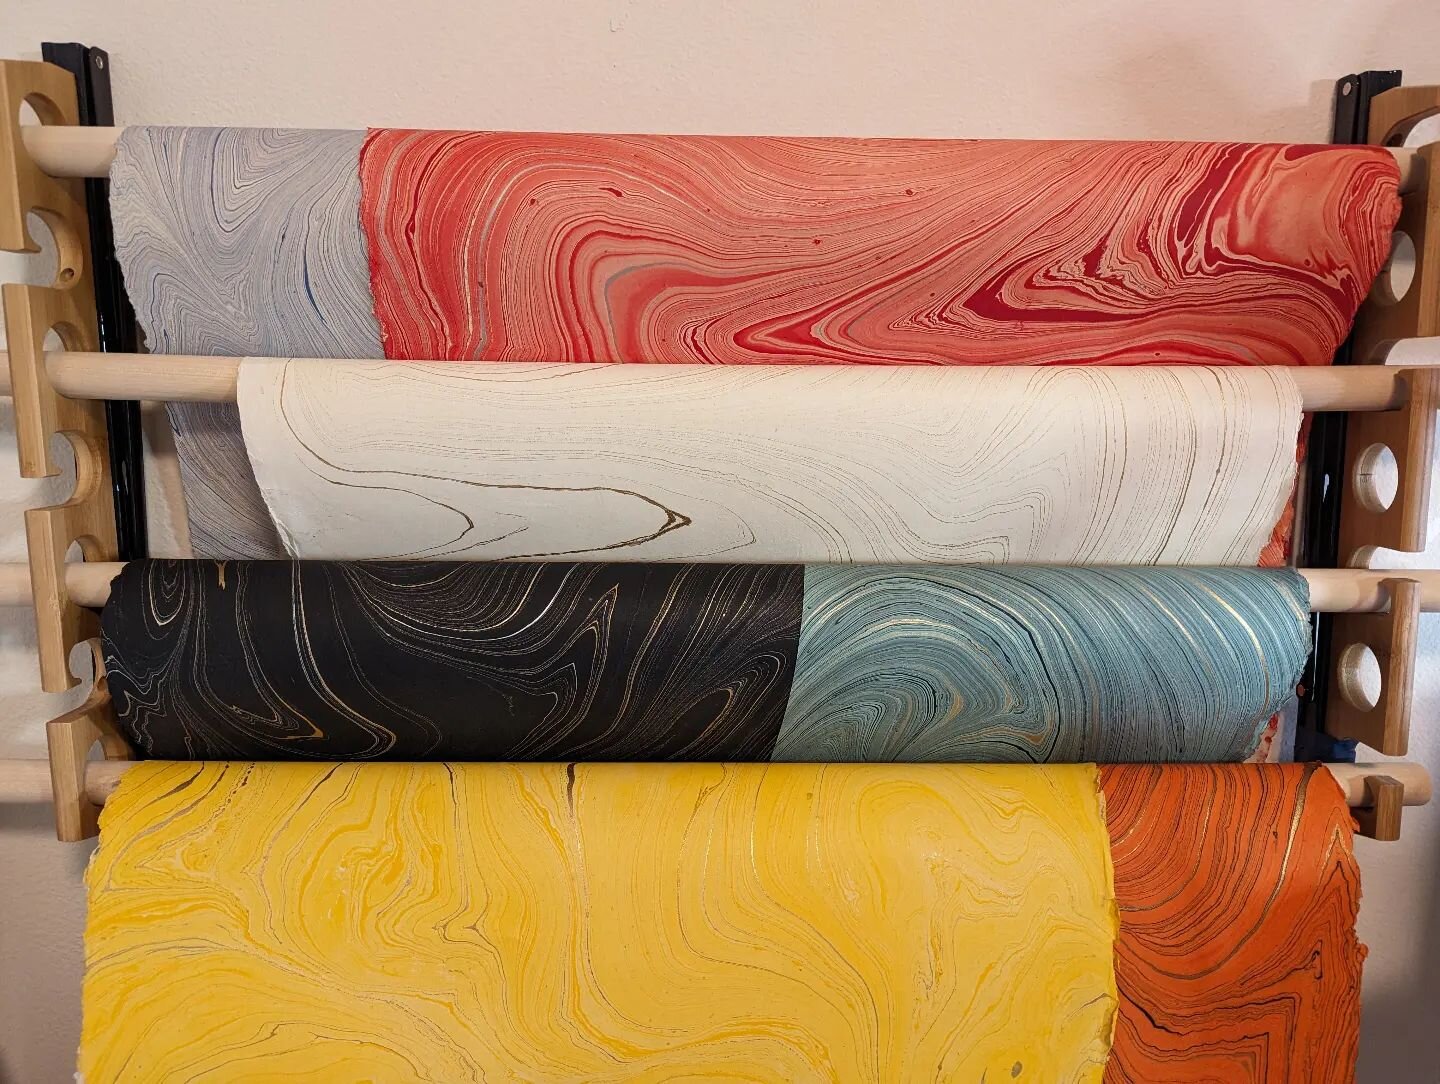 Some of the many colors coming in March! I can't pick a favorite! #bookbinding